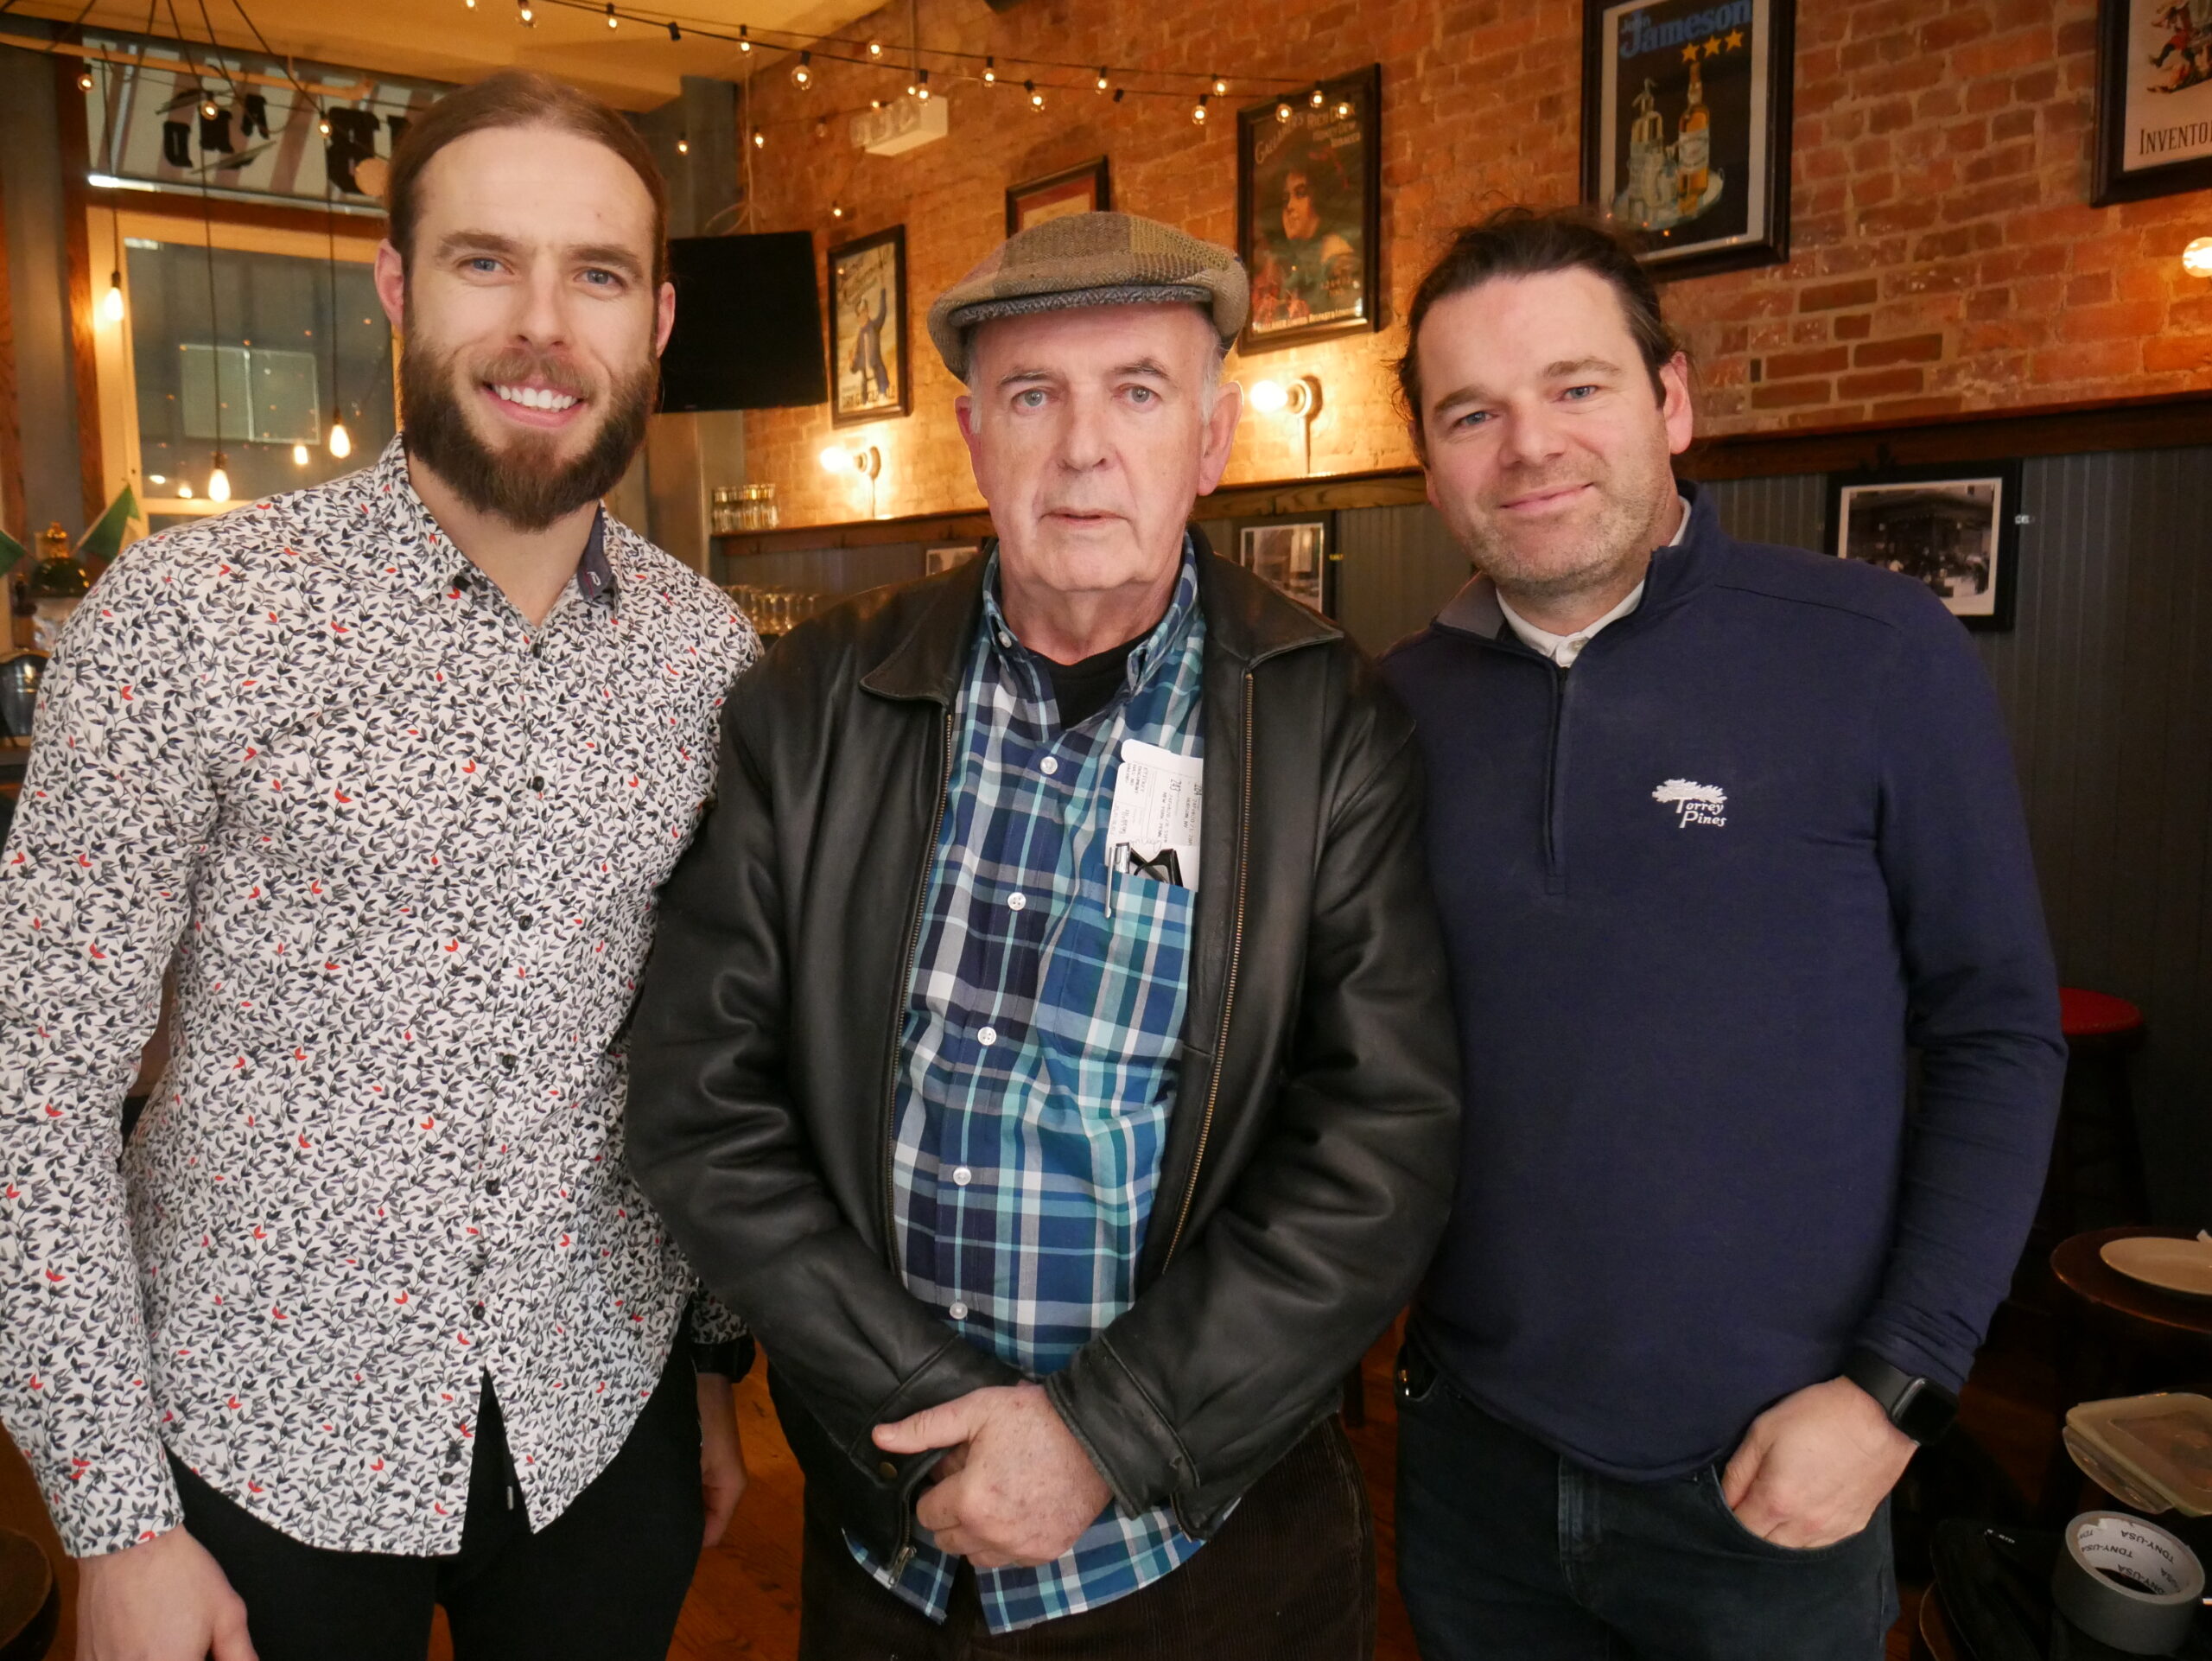 Michael Dorgan, Donal Gallagher and Johnny Kennedy, pictured in February 2020 after recording an episode for The Long Hall Podcast